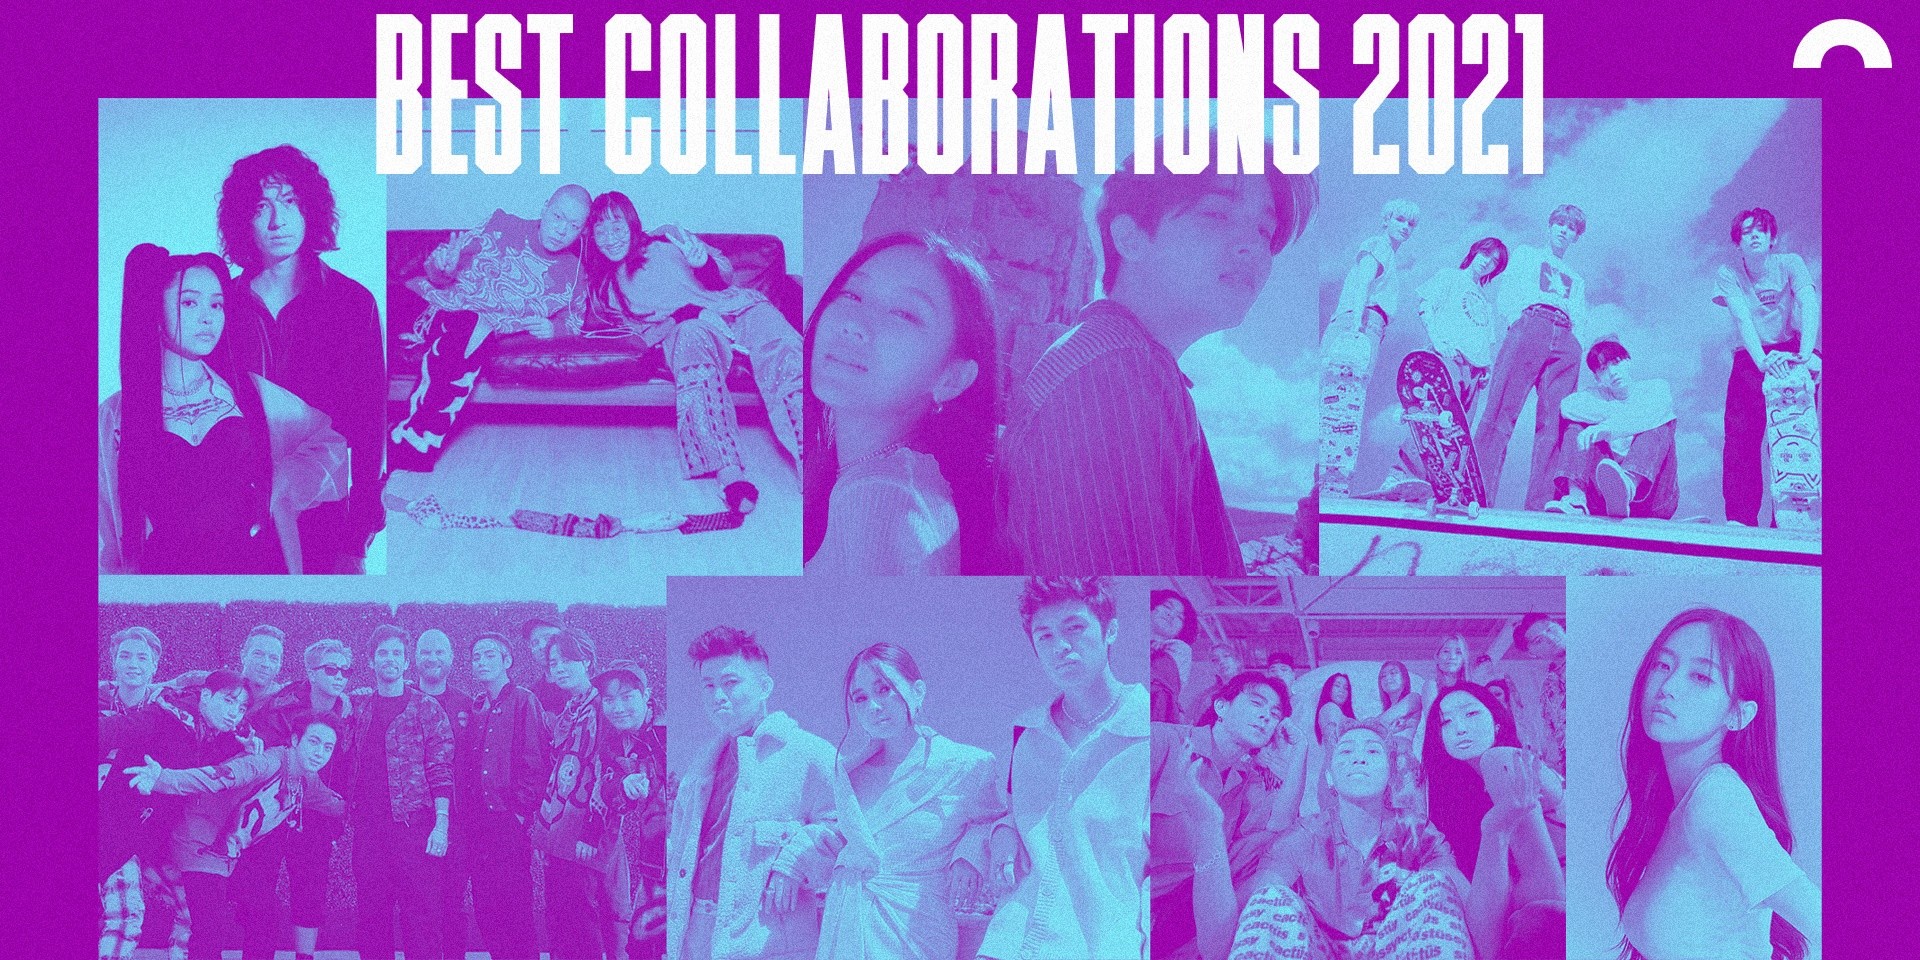 Best of 2021: Collaborations of the Year – Coldplay, BTS, TXT, Seori, eaJ, Bella Poarch, SUB URBAN, and more